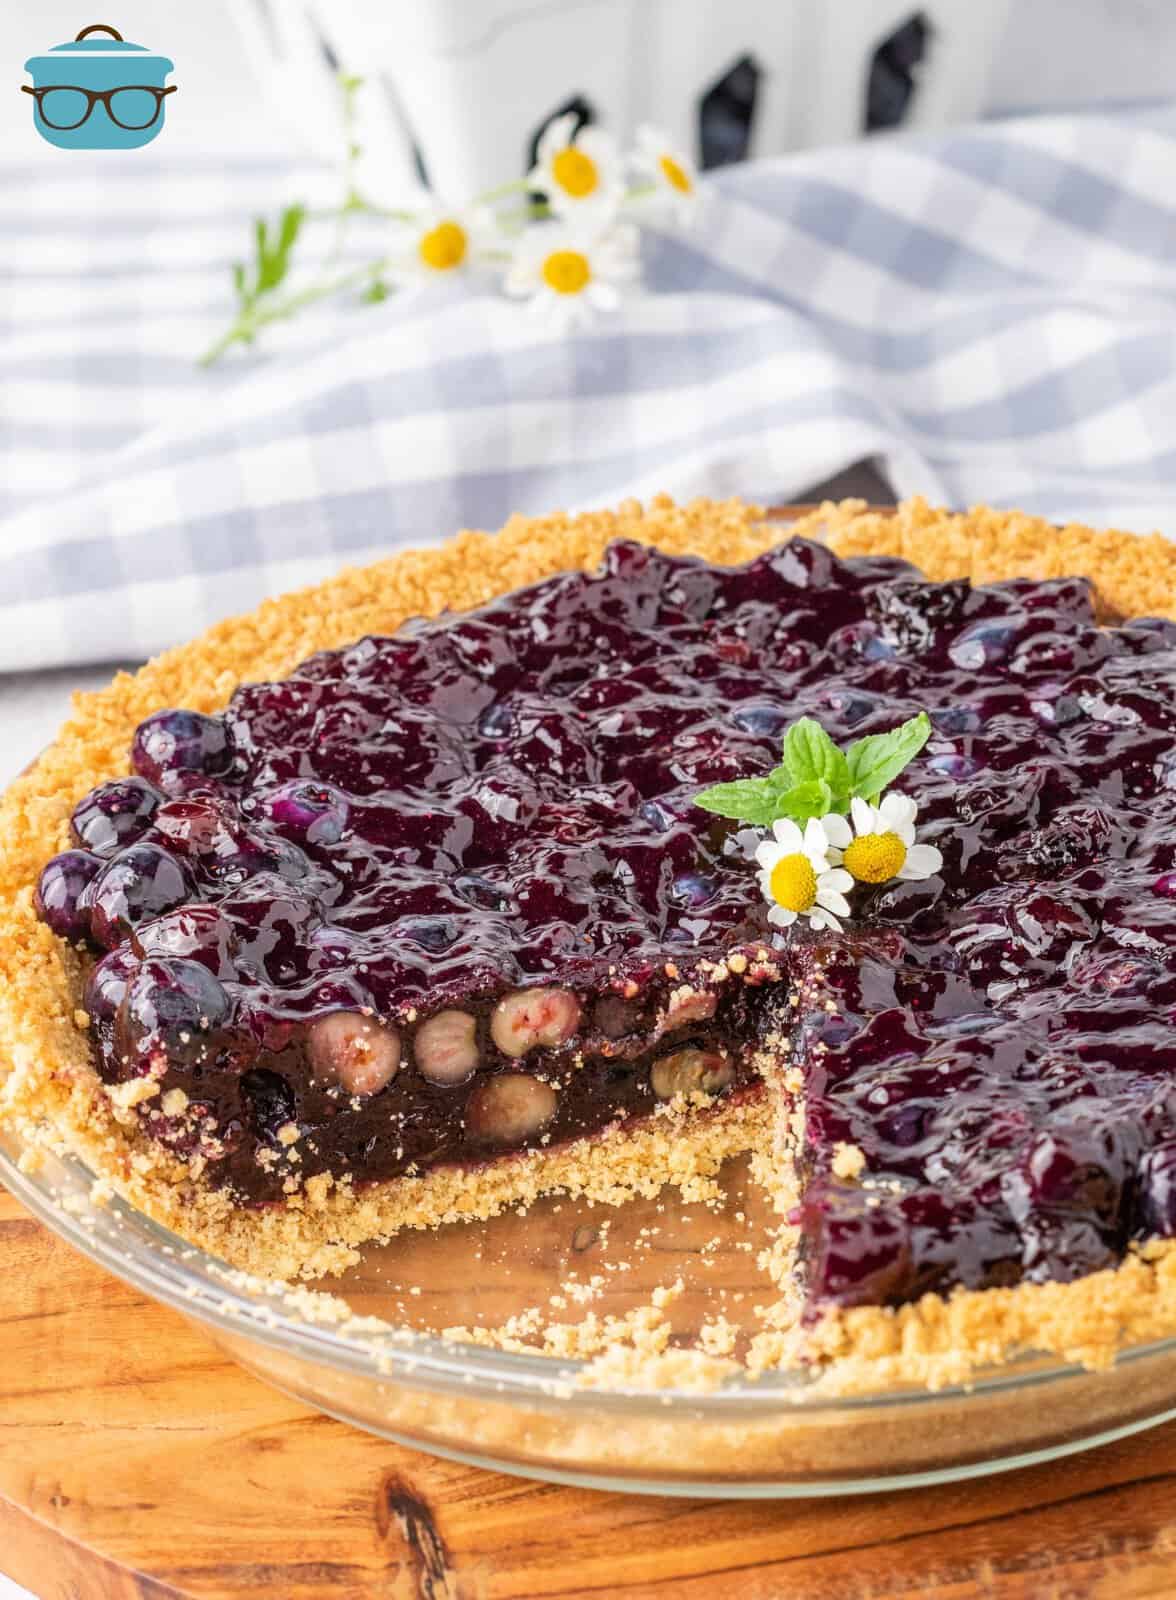 A homemade Blueberry Jell-O Pie with a slice missing.